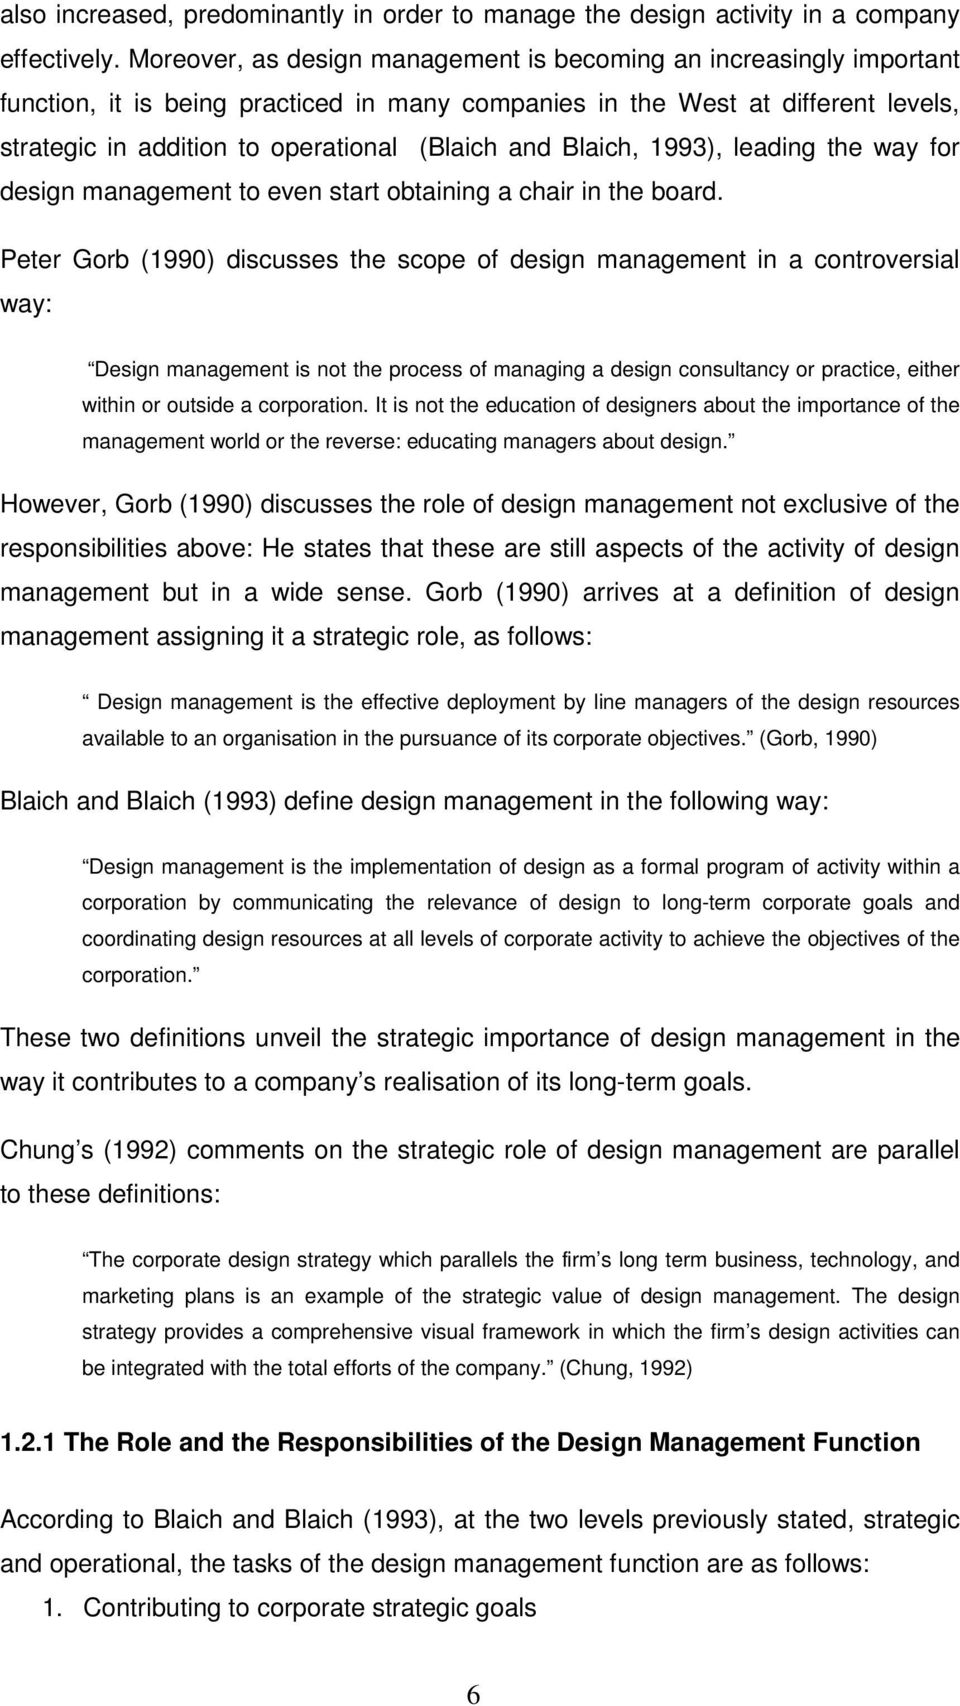 and Blaich, 1993), leading the way for design management to even start obtaining a chair in the board.